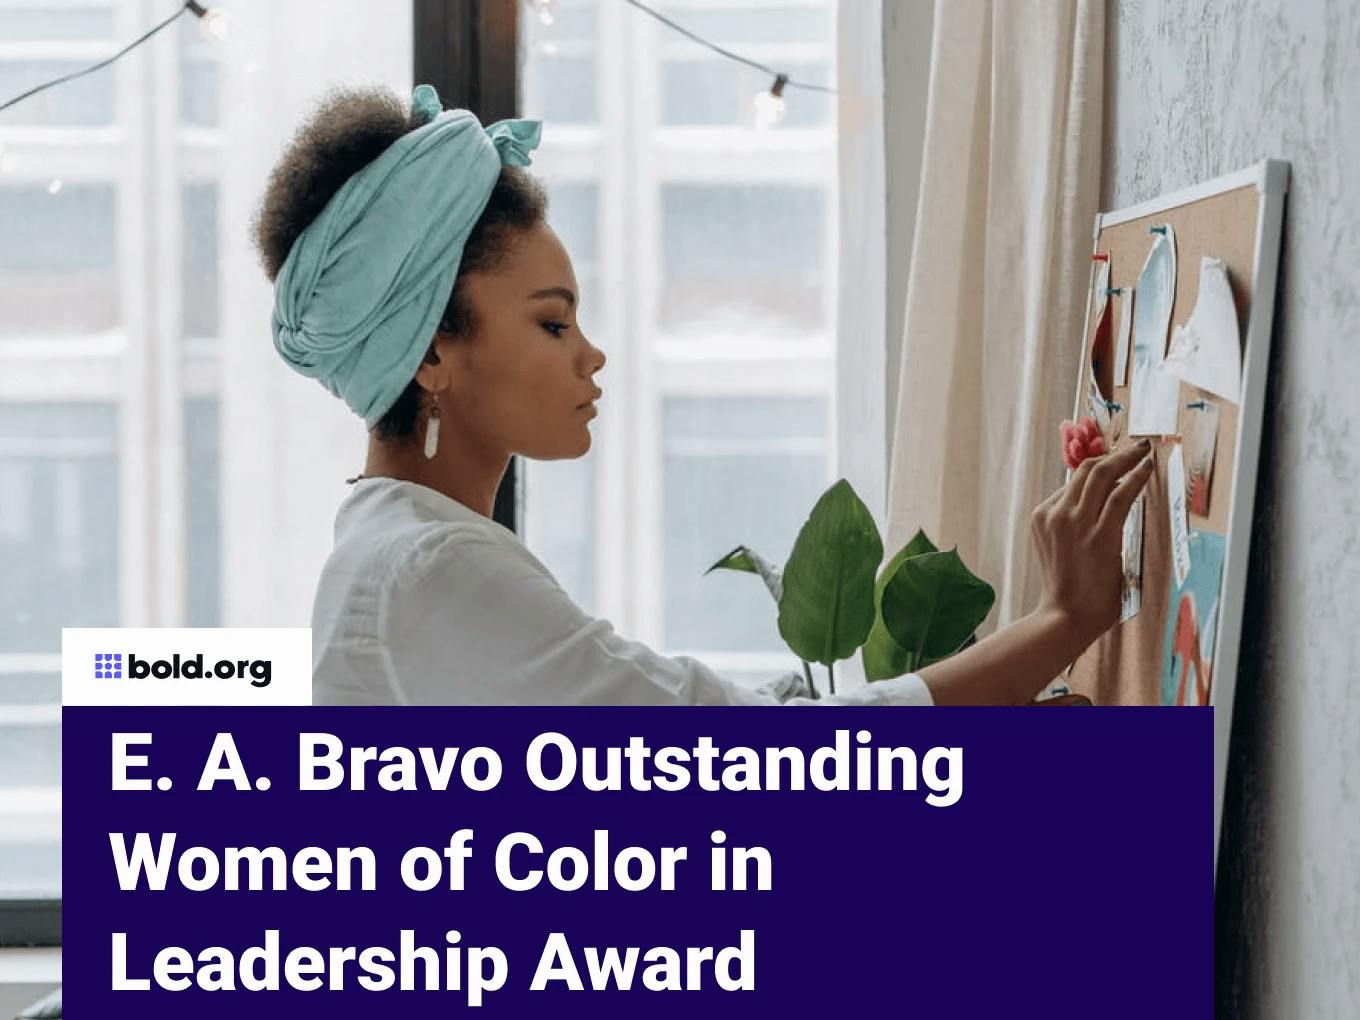 E. A. Bravo Outstanding Women of Color in Leadership Award